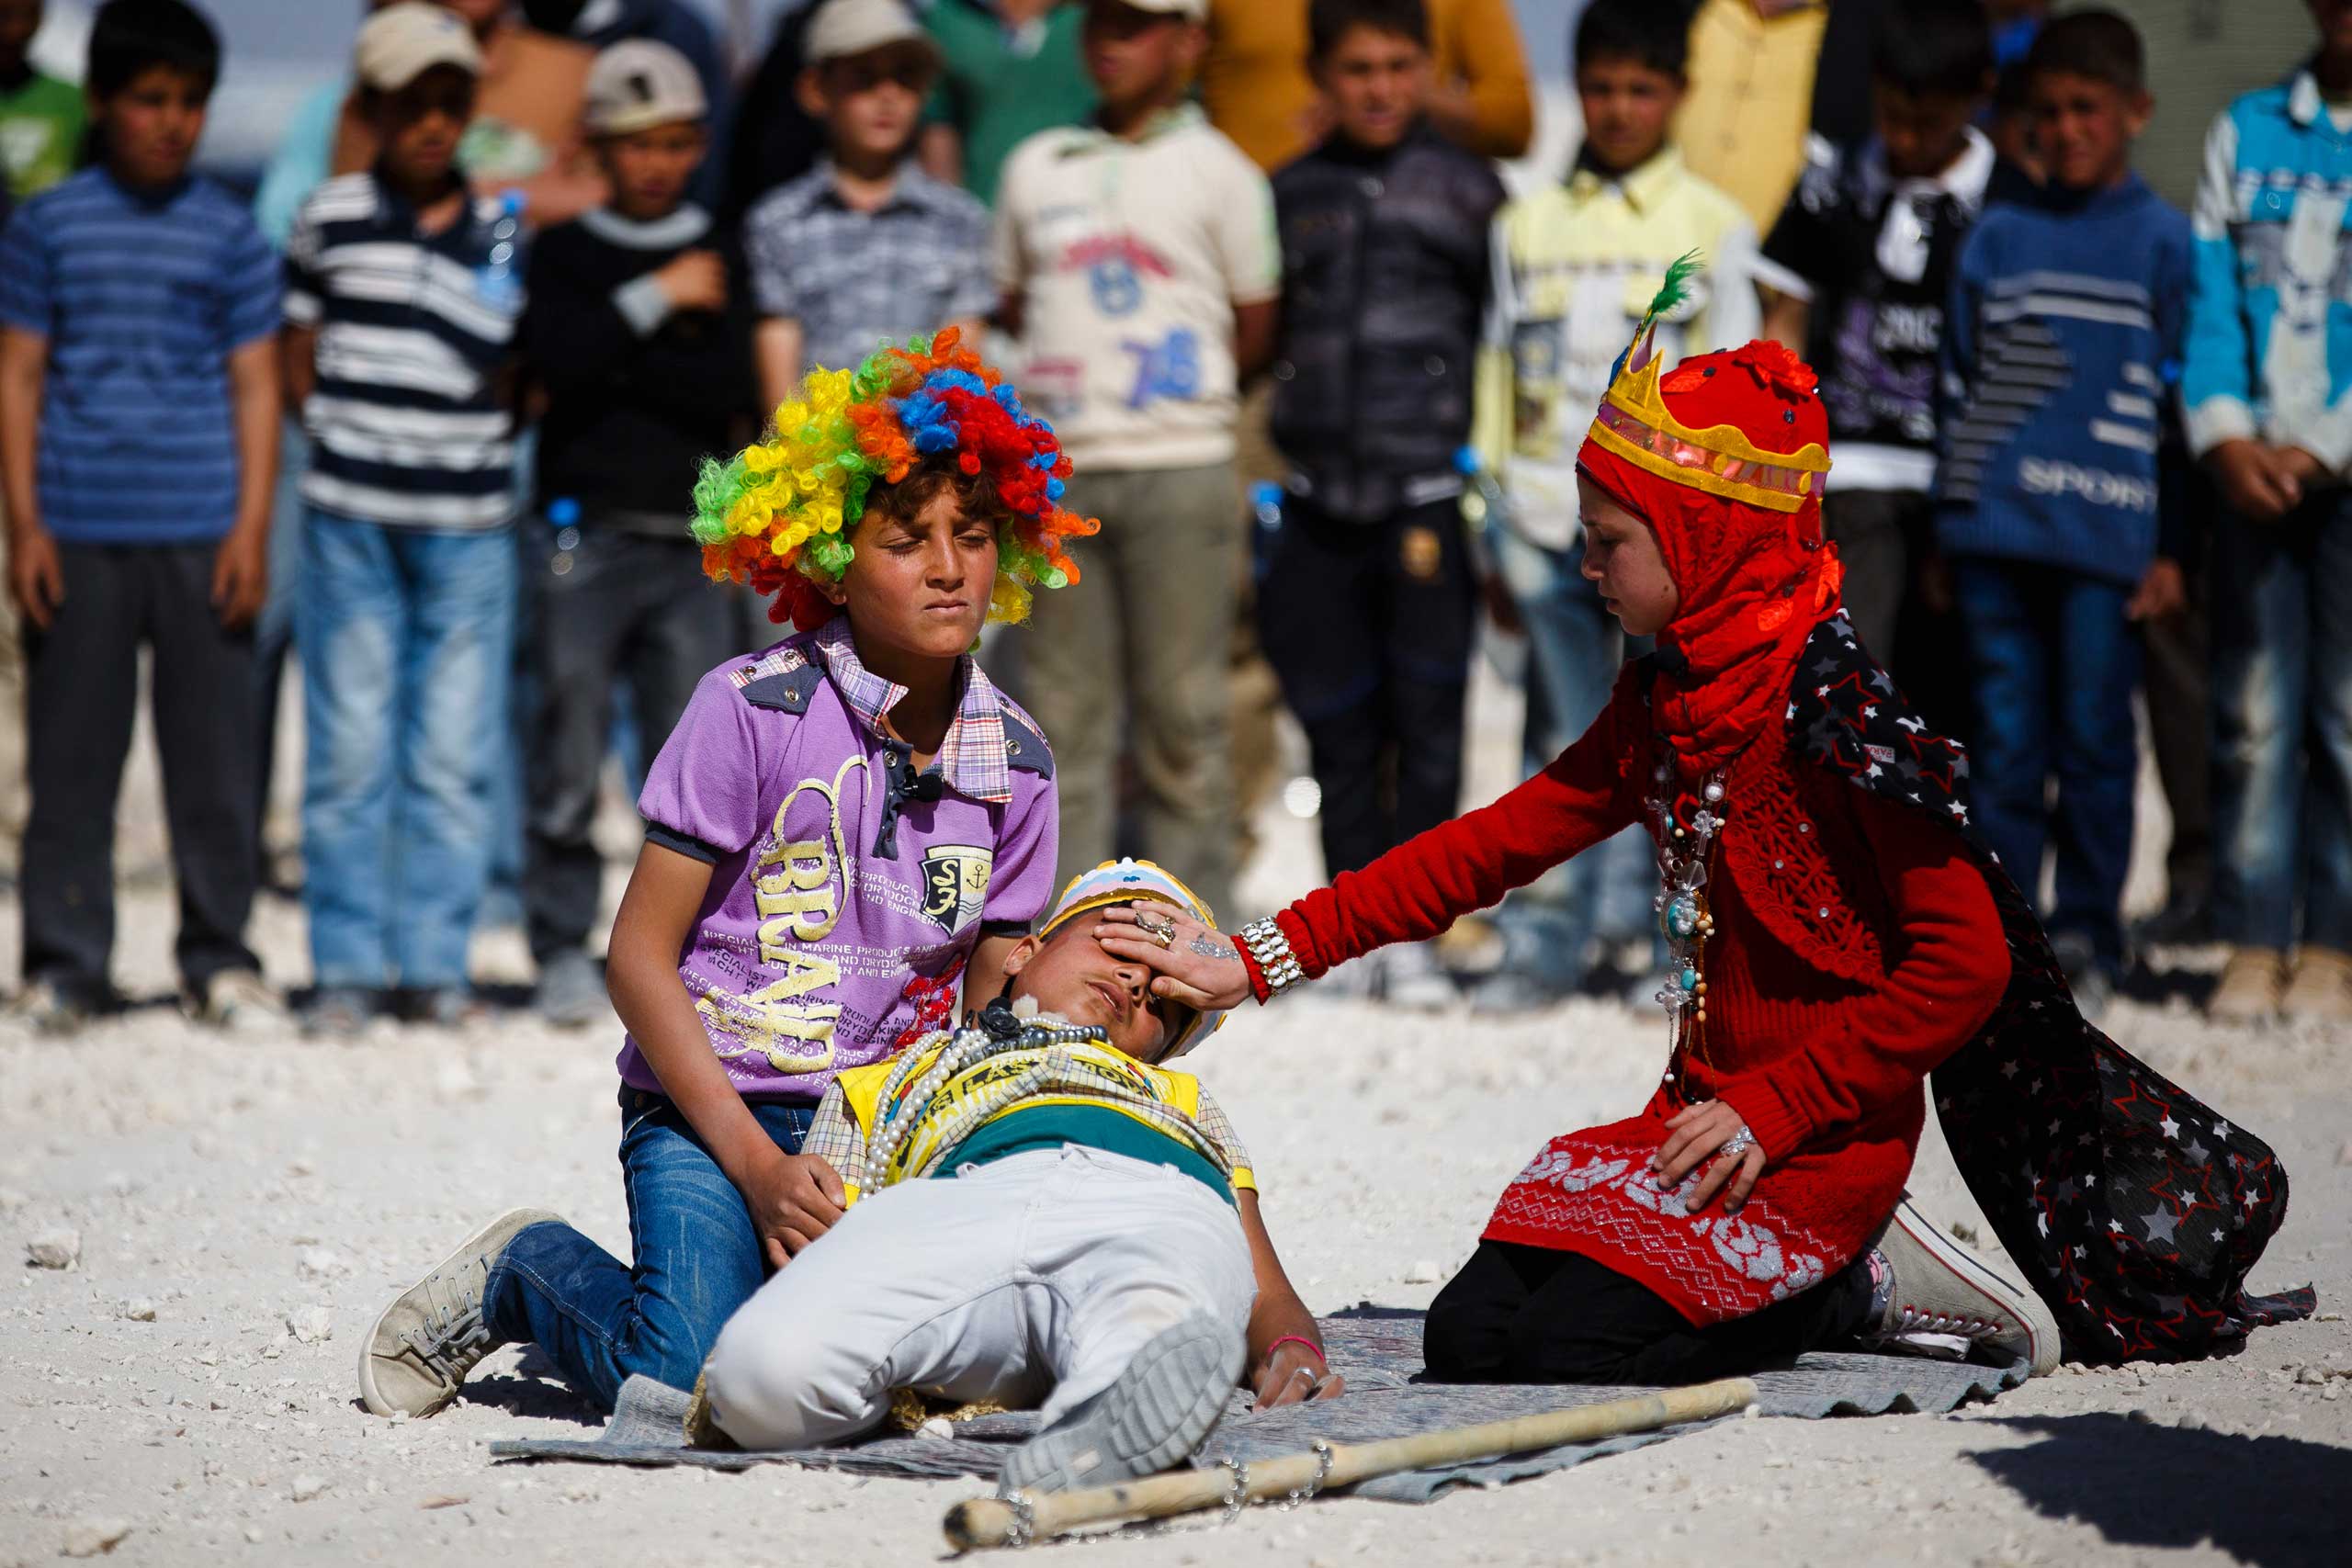 Syrian children perform in an adaptation of Shakespeare's King Lear at the Zaatari Refugee Camp in Mafraq, Jordan, March 27, 2014.